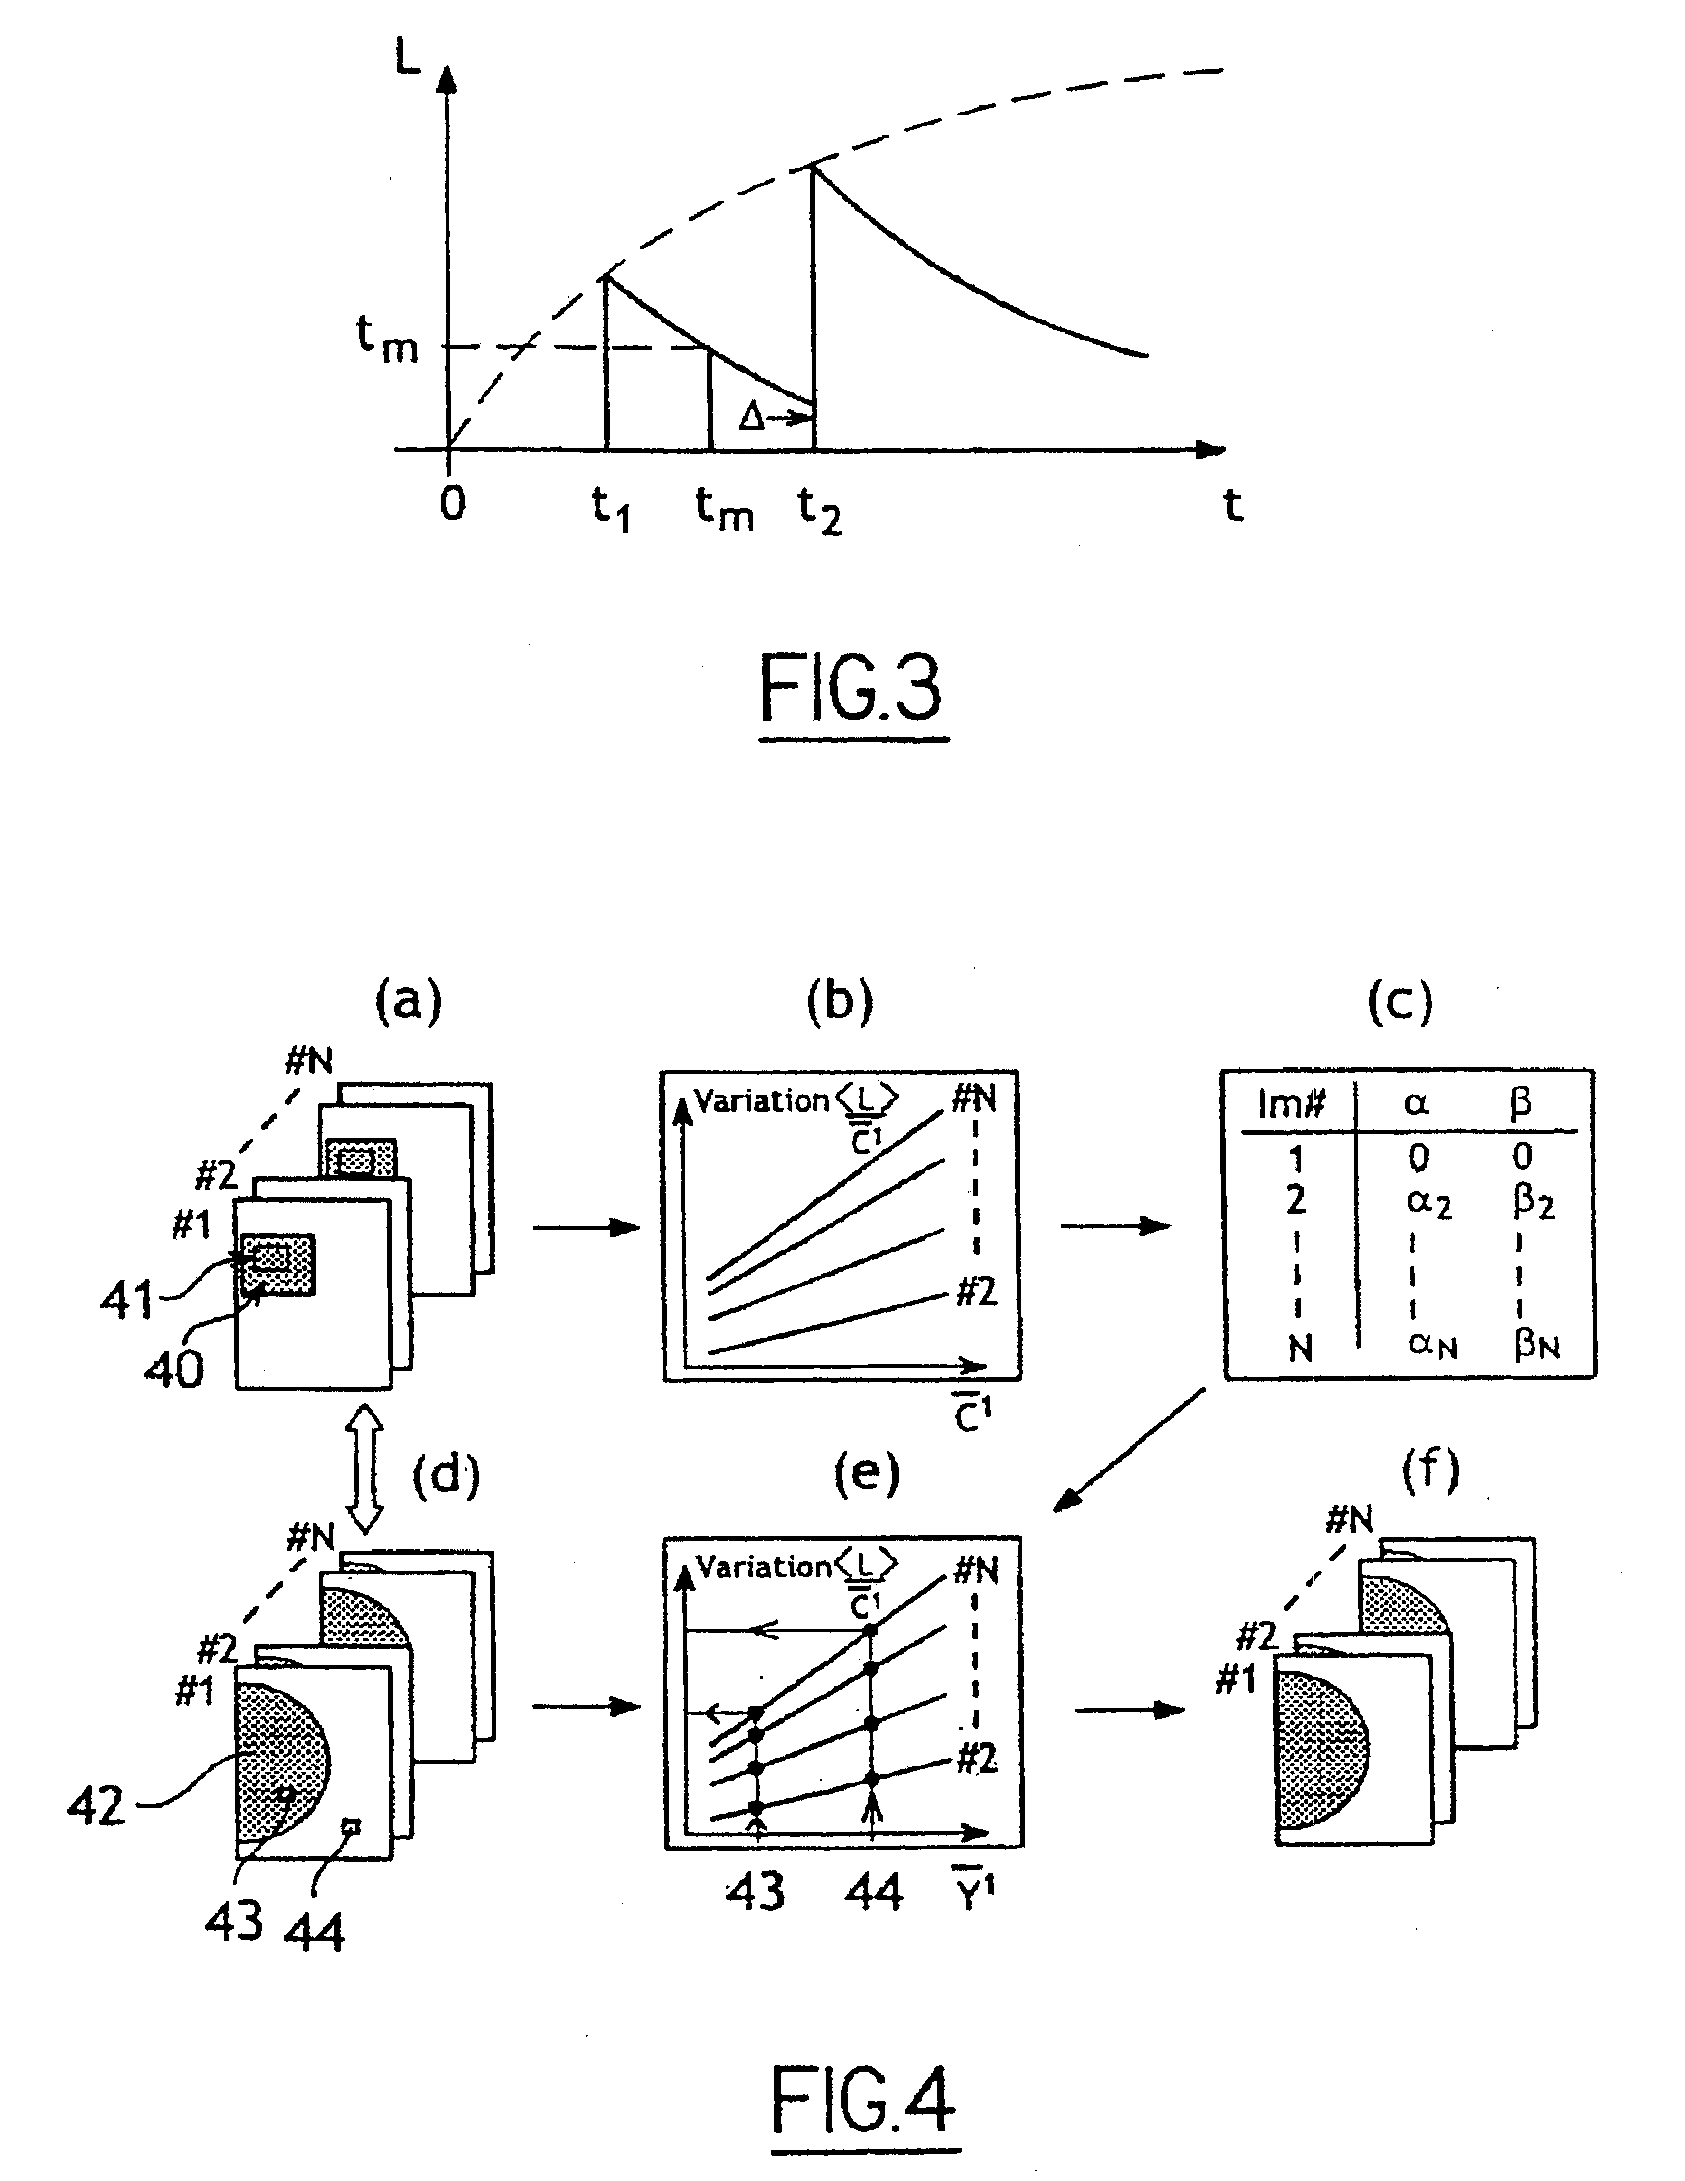 Method and Apparatus for Calibration and Correction of Gray Levels in Images